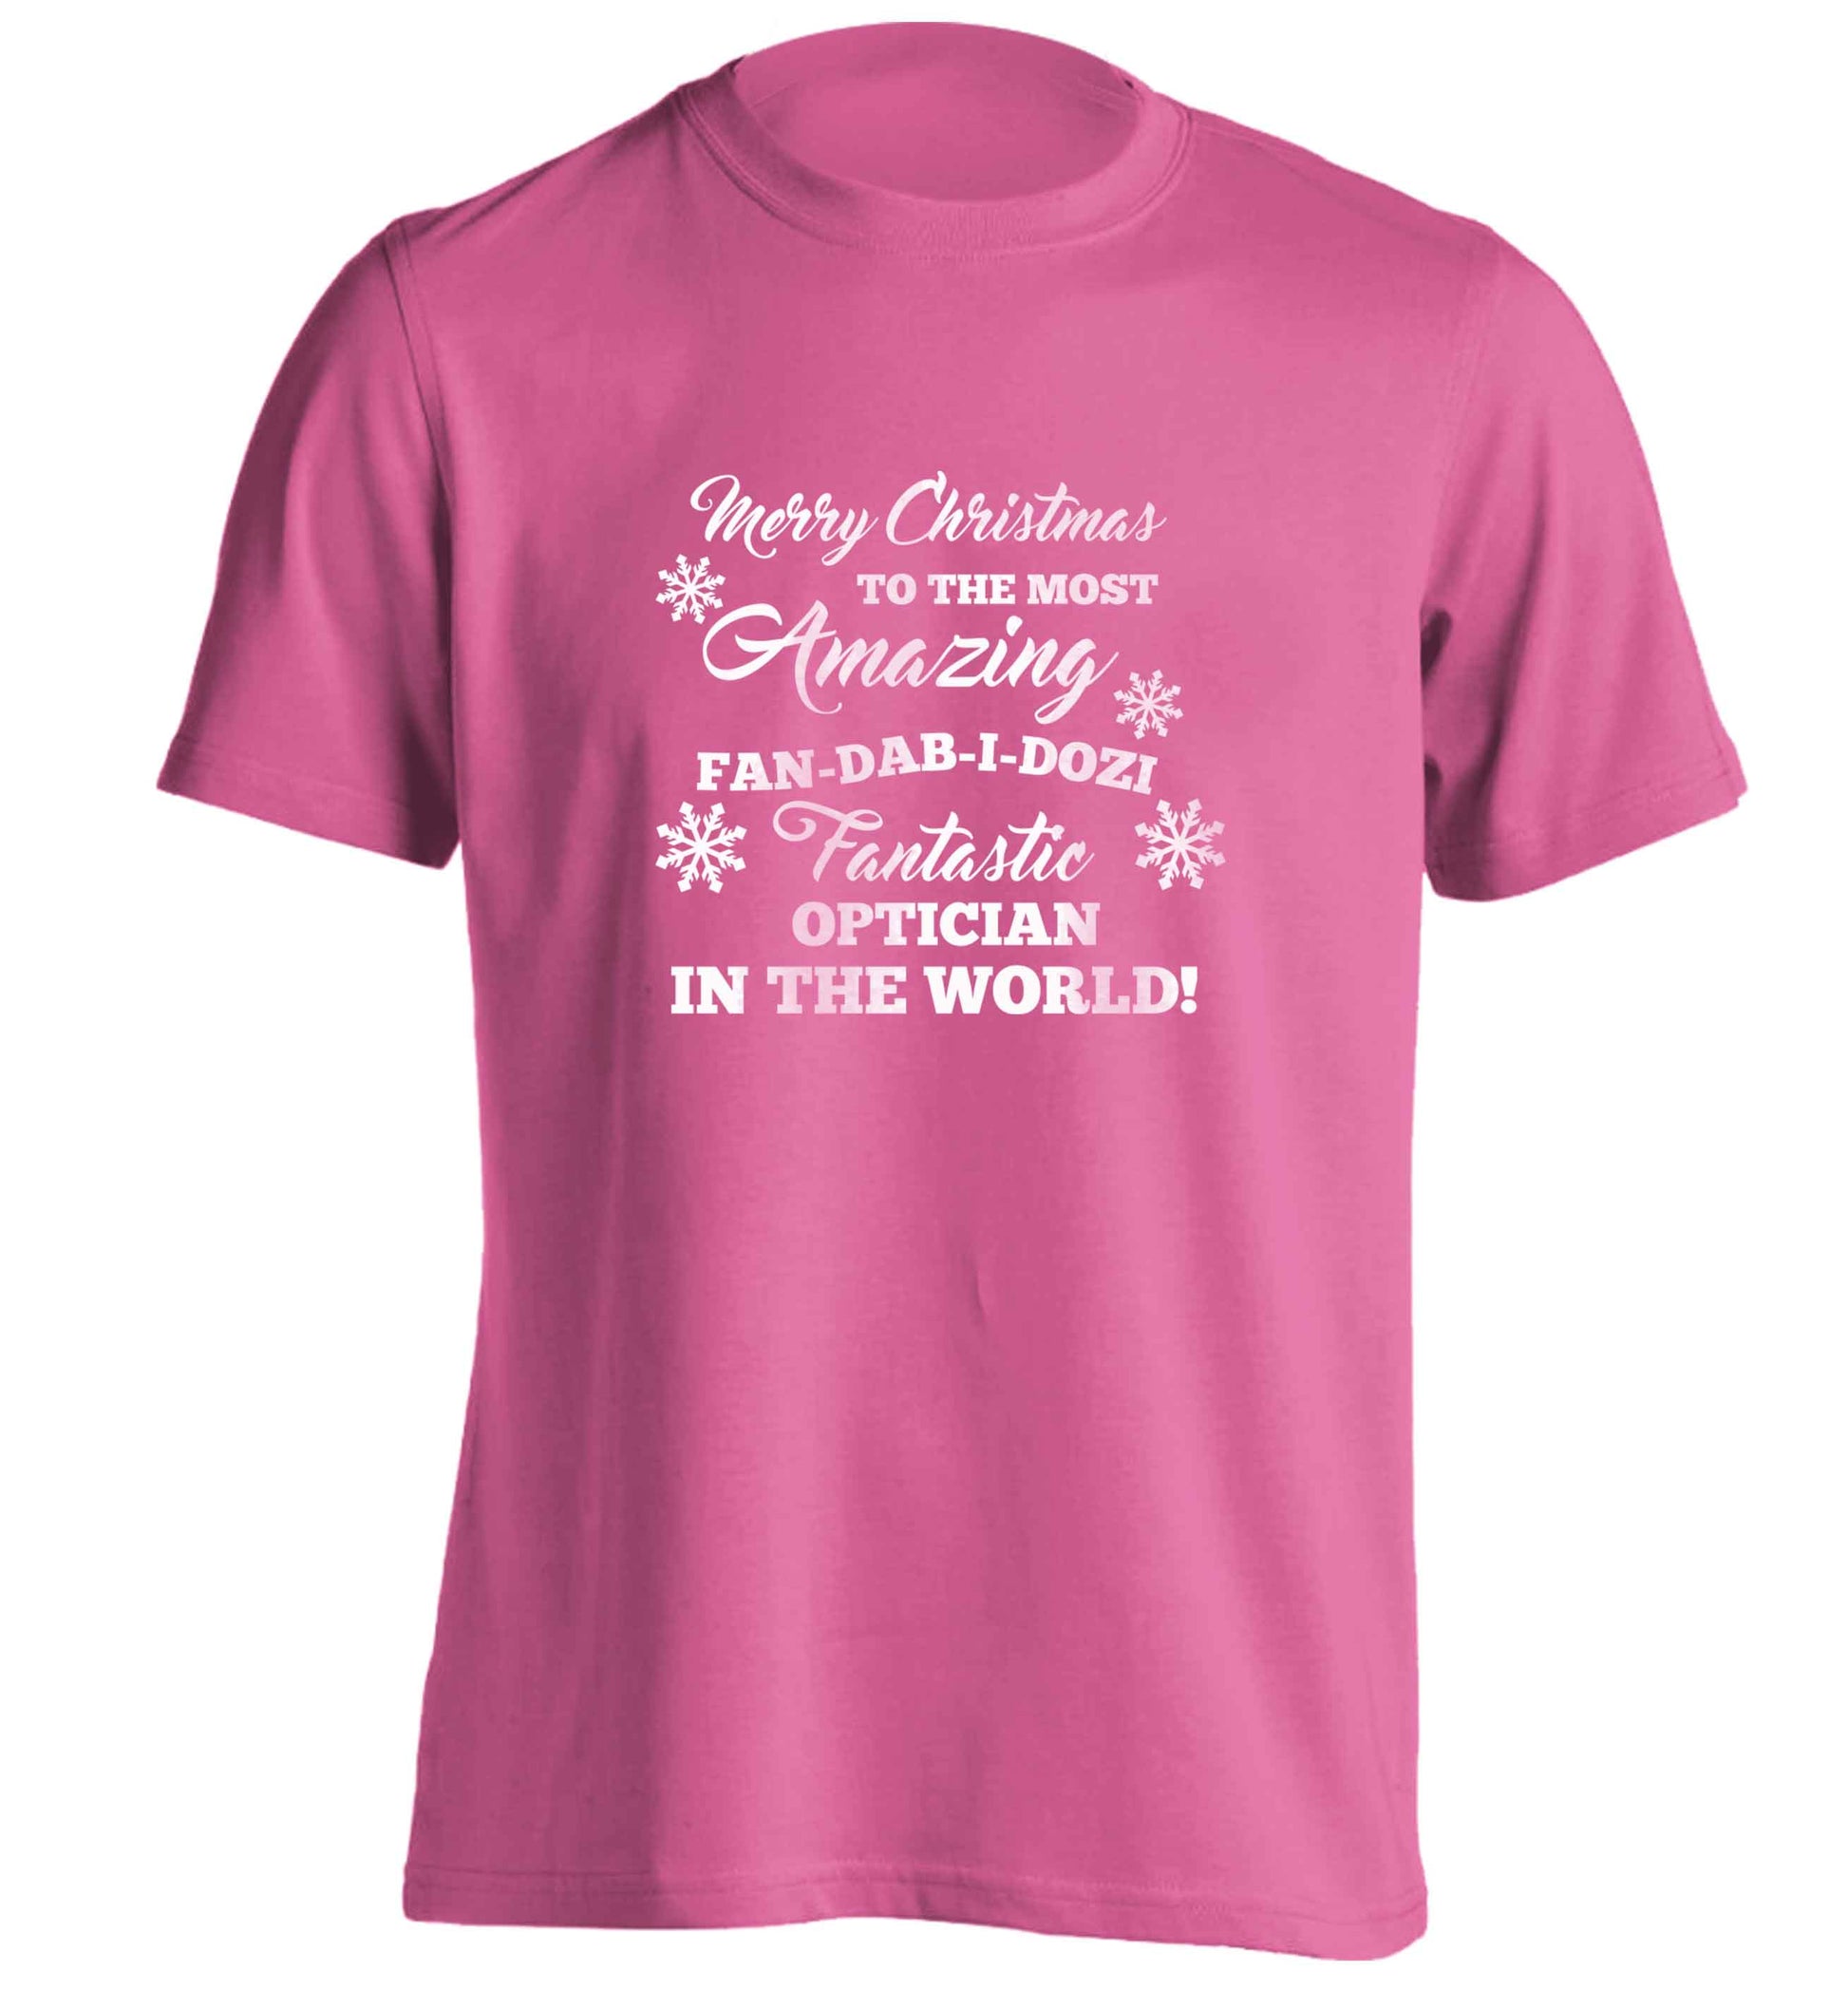 Merry Christmas to the most amazing optician in the world! adults unisex pink Tshirt 2XL